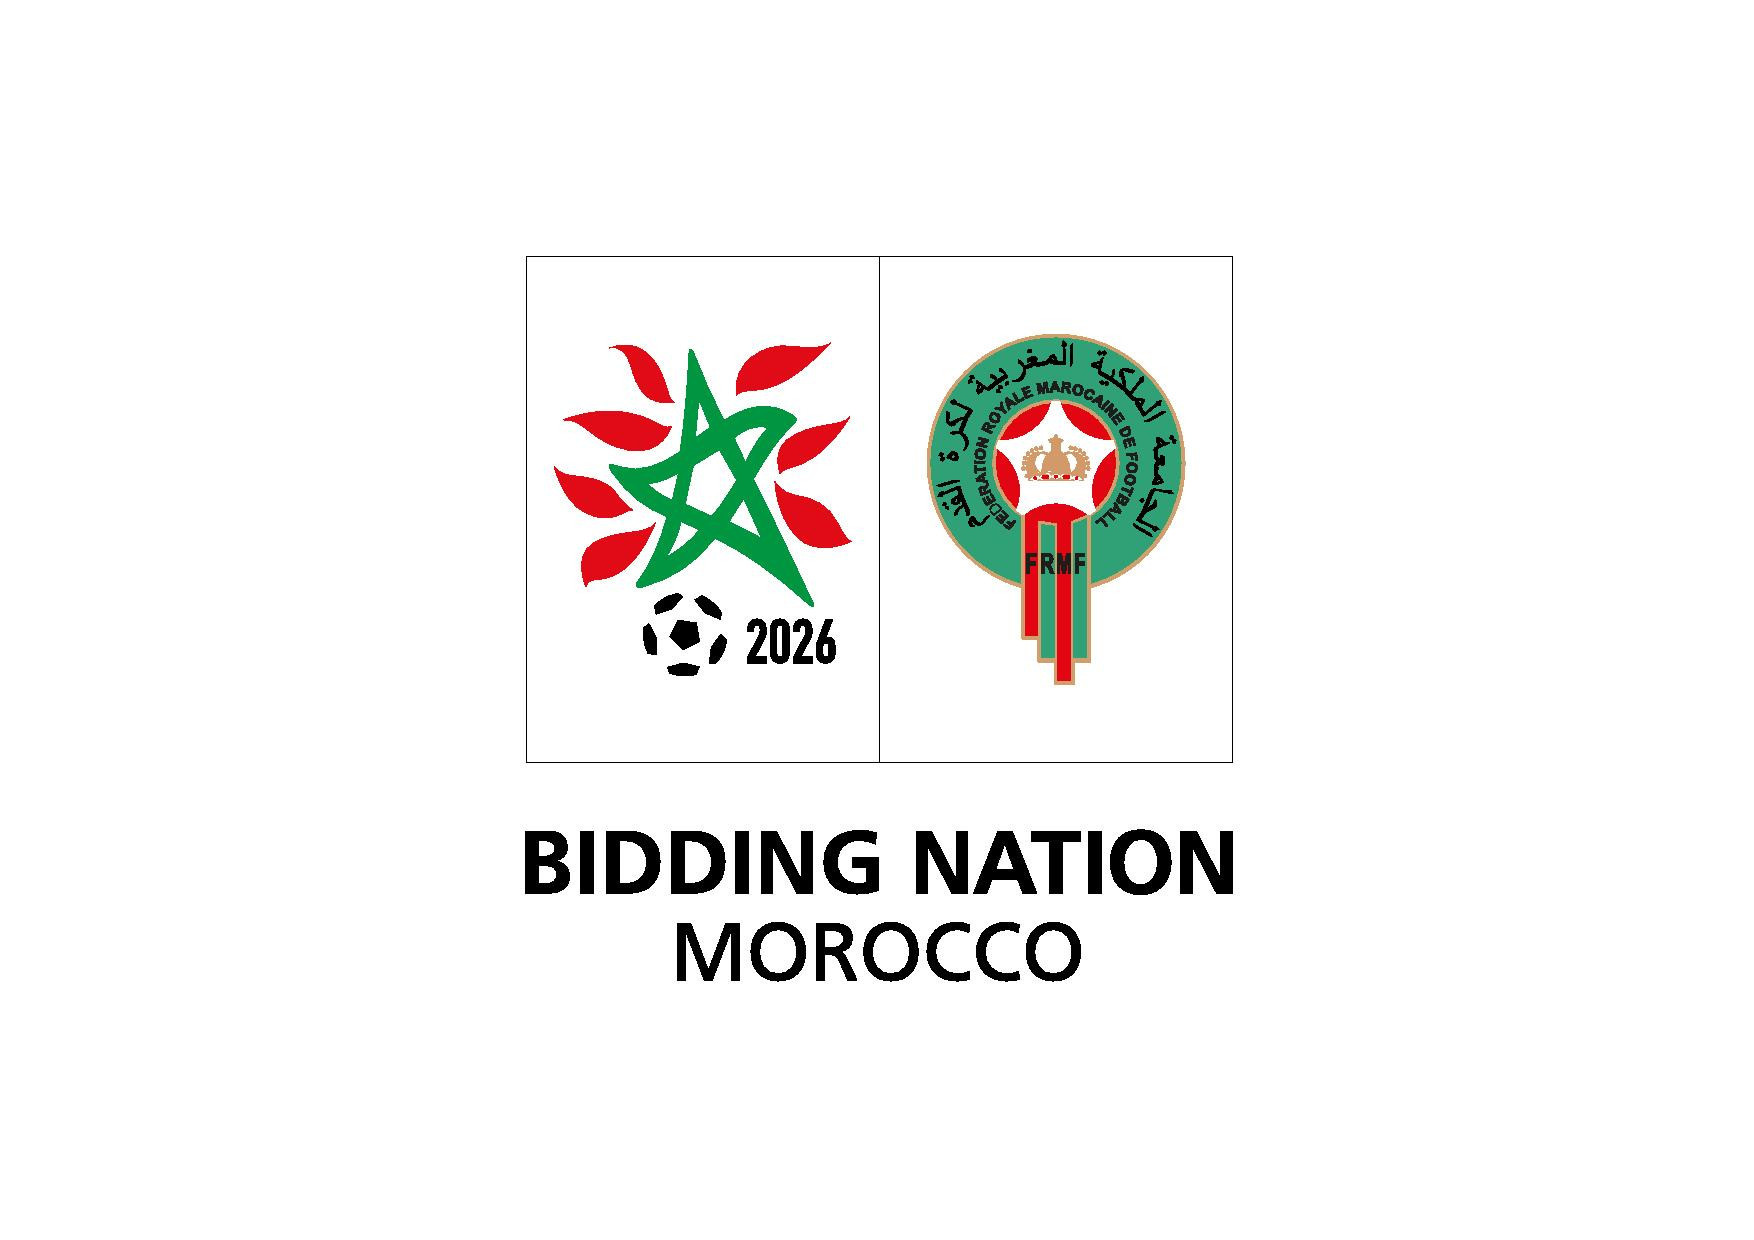 Hicham El Amrani has been appointed chief executive of Morocco's bid for the 2026 World Cup as the country officially launched their attempt at securing the hosting rights for the tournament ©Morocco 2026